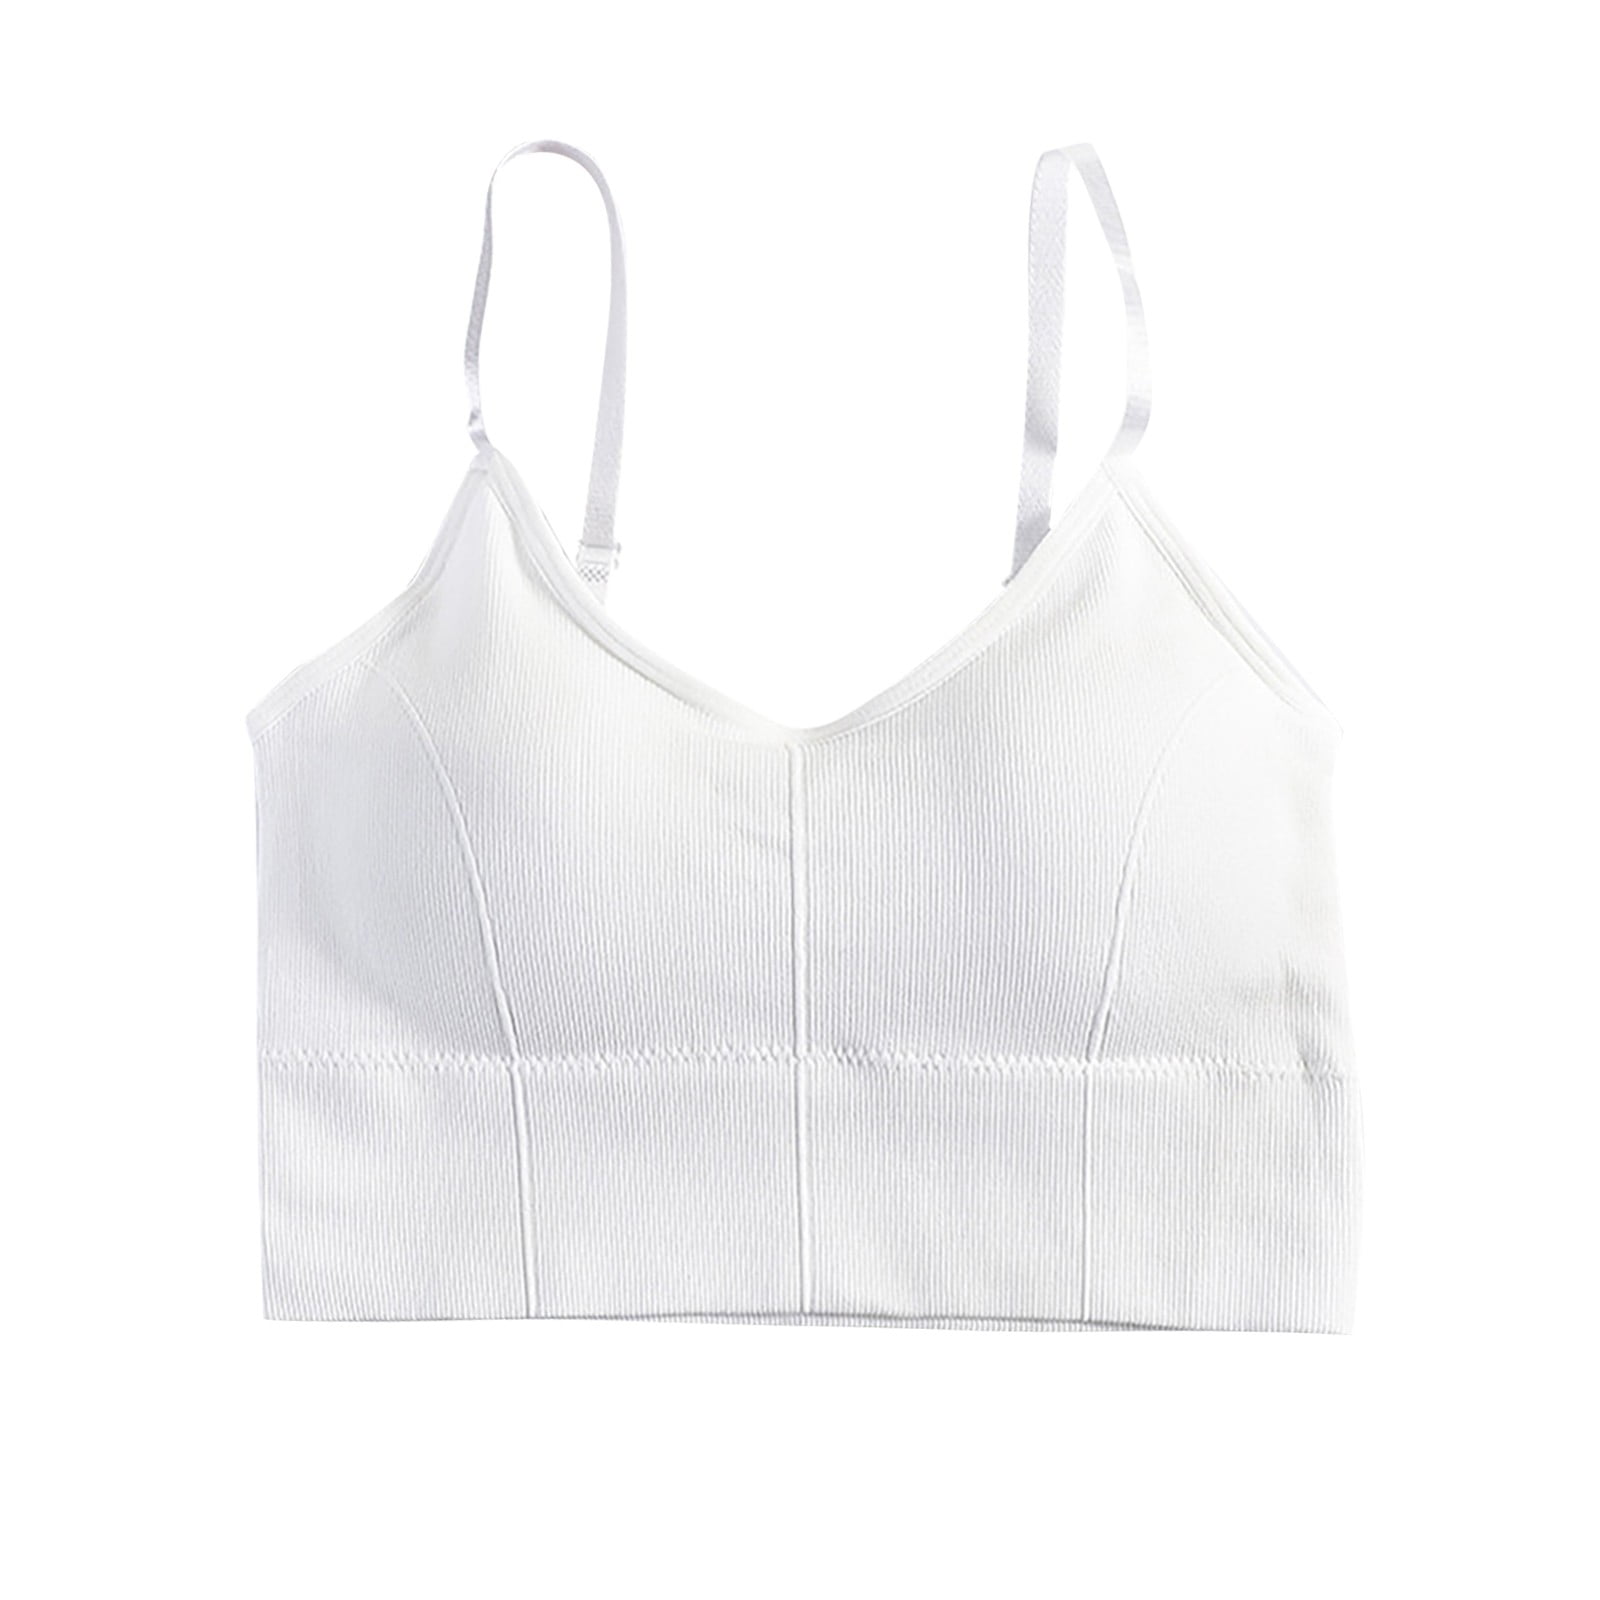 Bra Tank With Built In Women Bras Tank Tops Adjustable Strap Stretch Cotton  Camisole With Built In Padded Shelf Bra Small Color A 